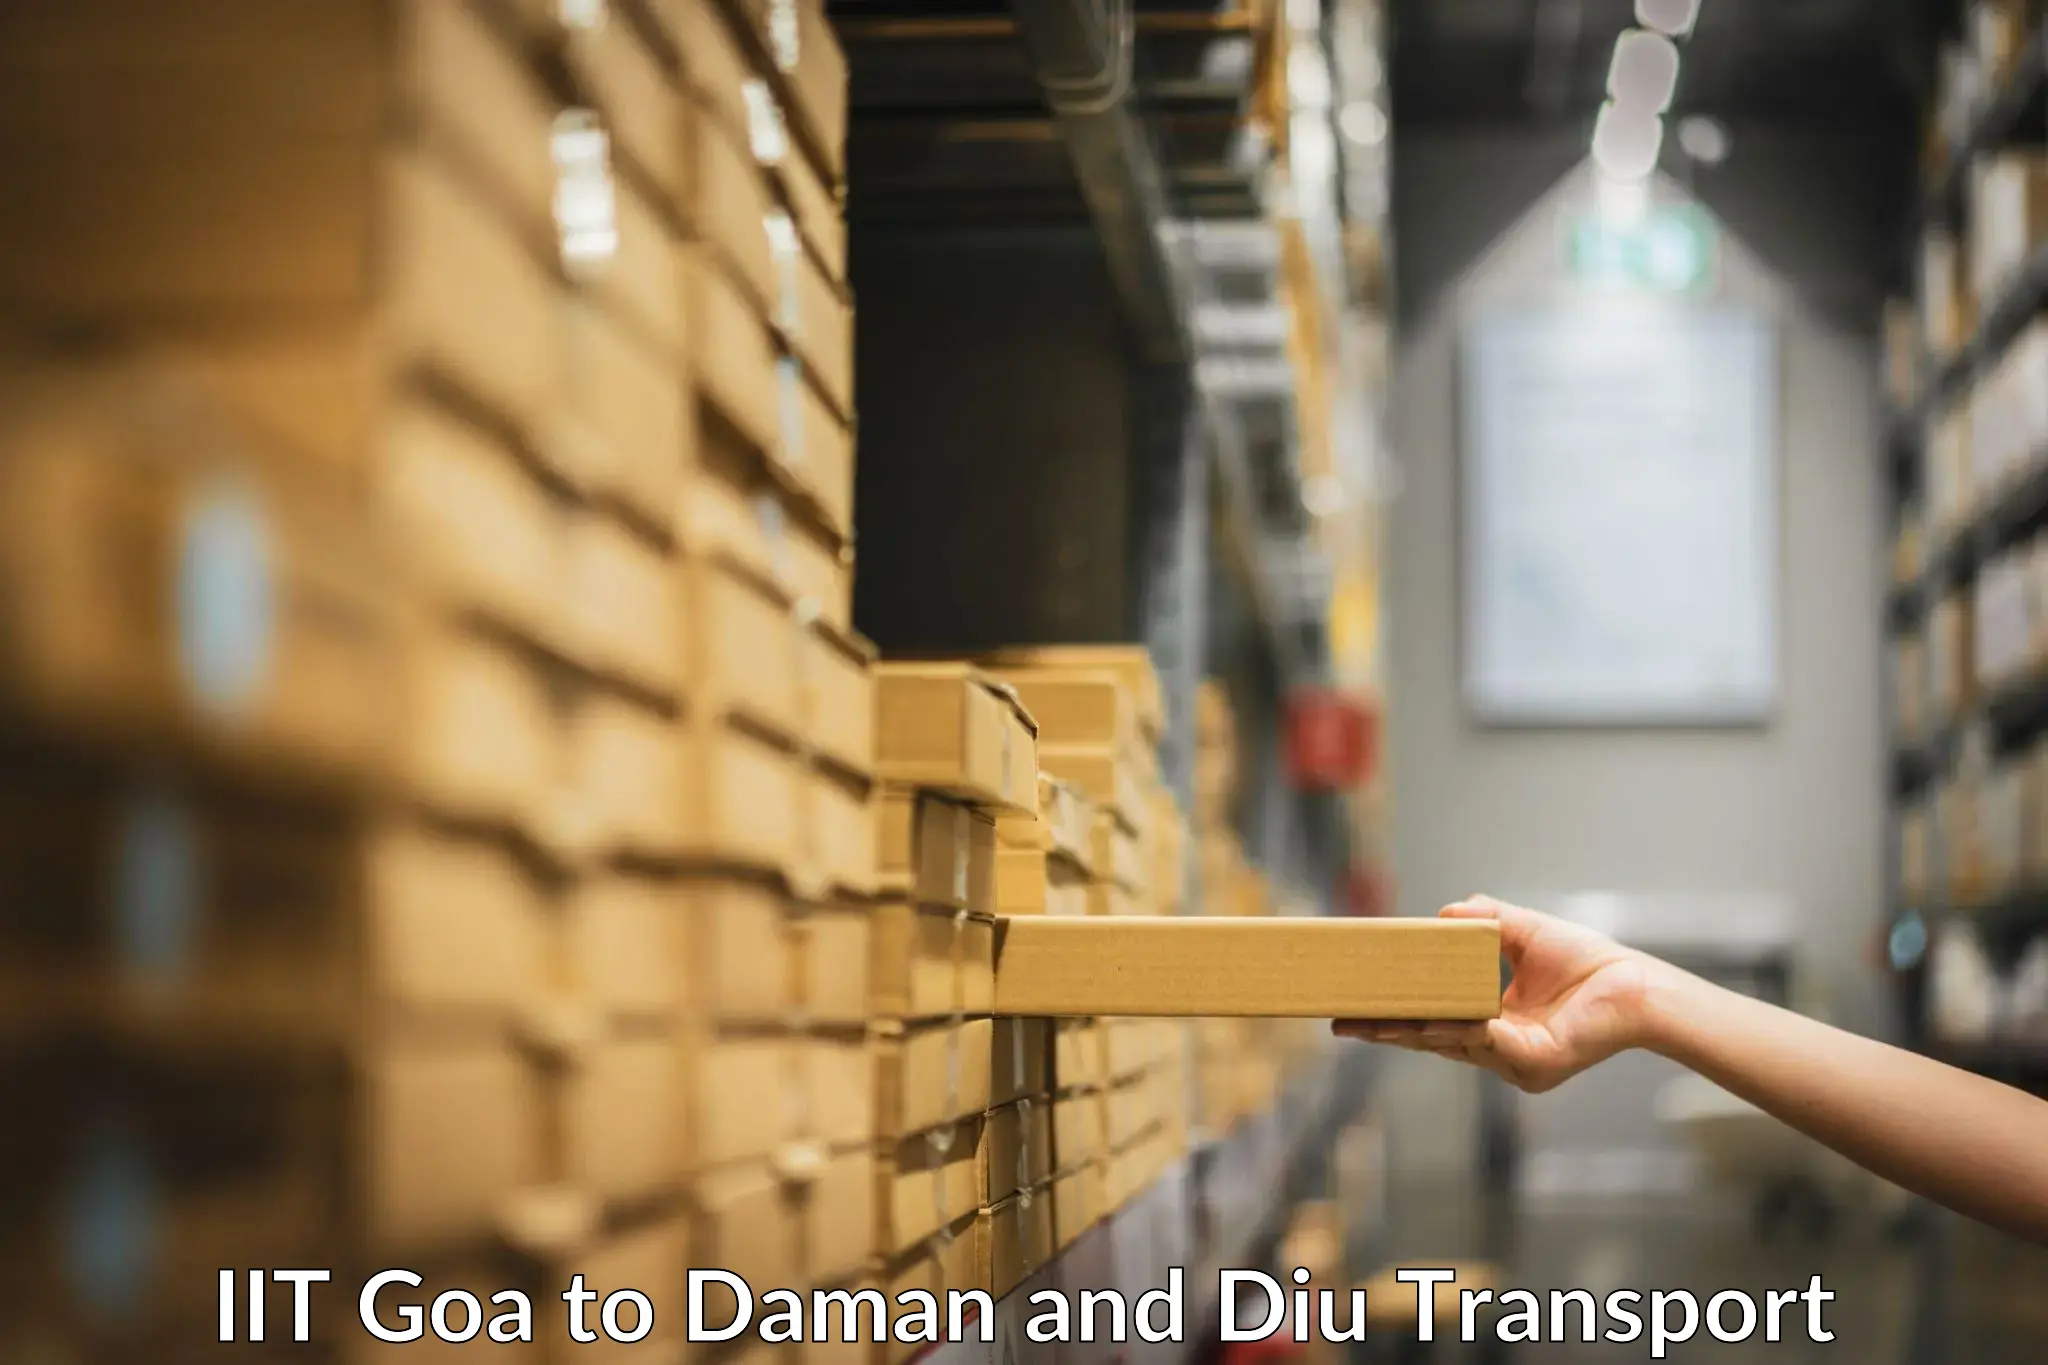 Domestic goods transportation services IIT Goa to Diu